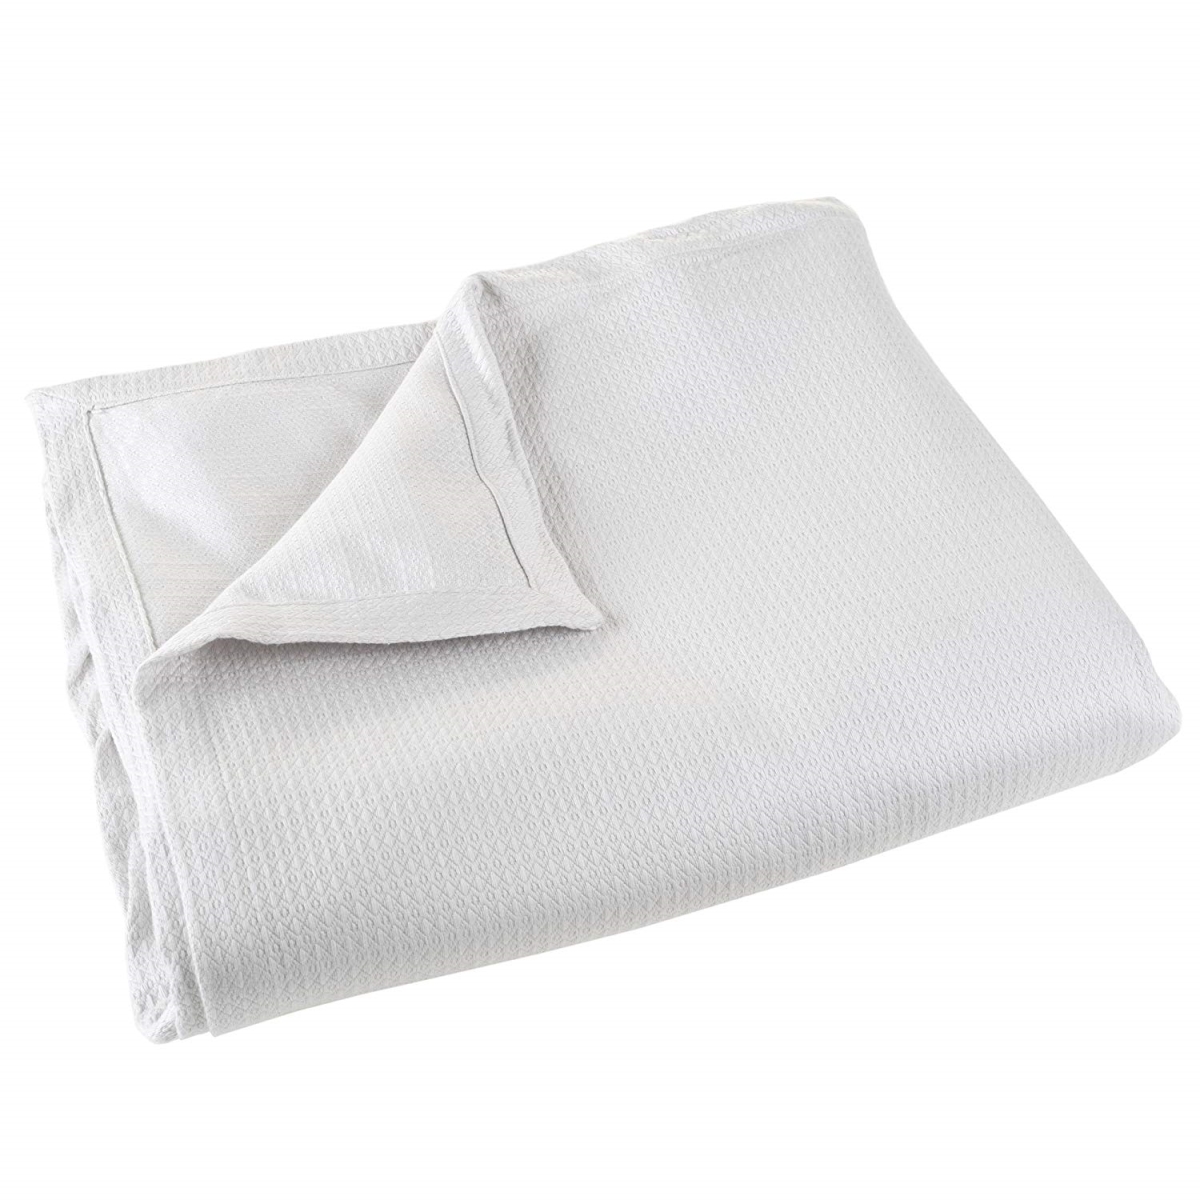 61a-43289 Cotton Blanket, Soft Breathable 100 Percent Cotton Blanket, Platinum - Full & Queen Size